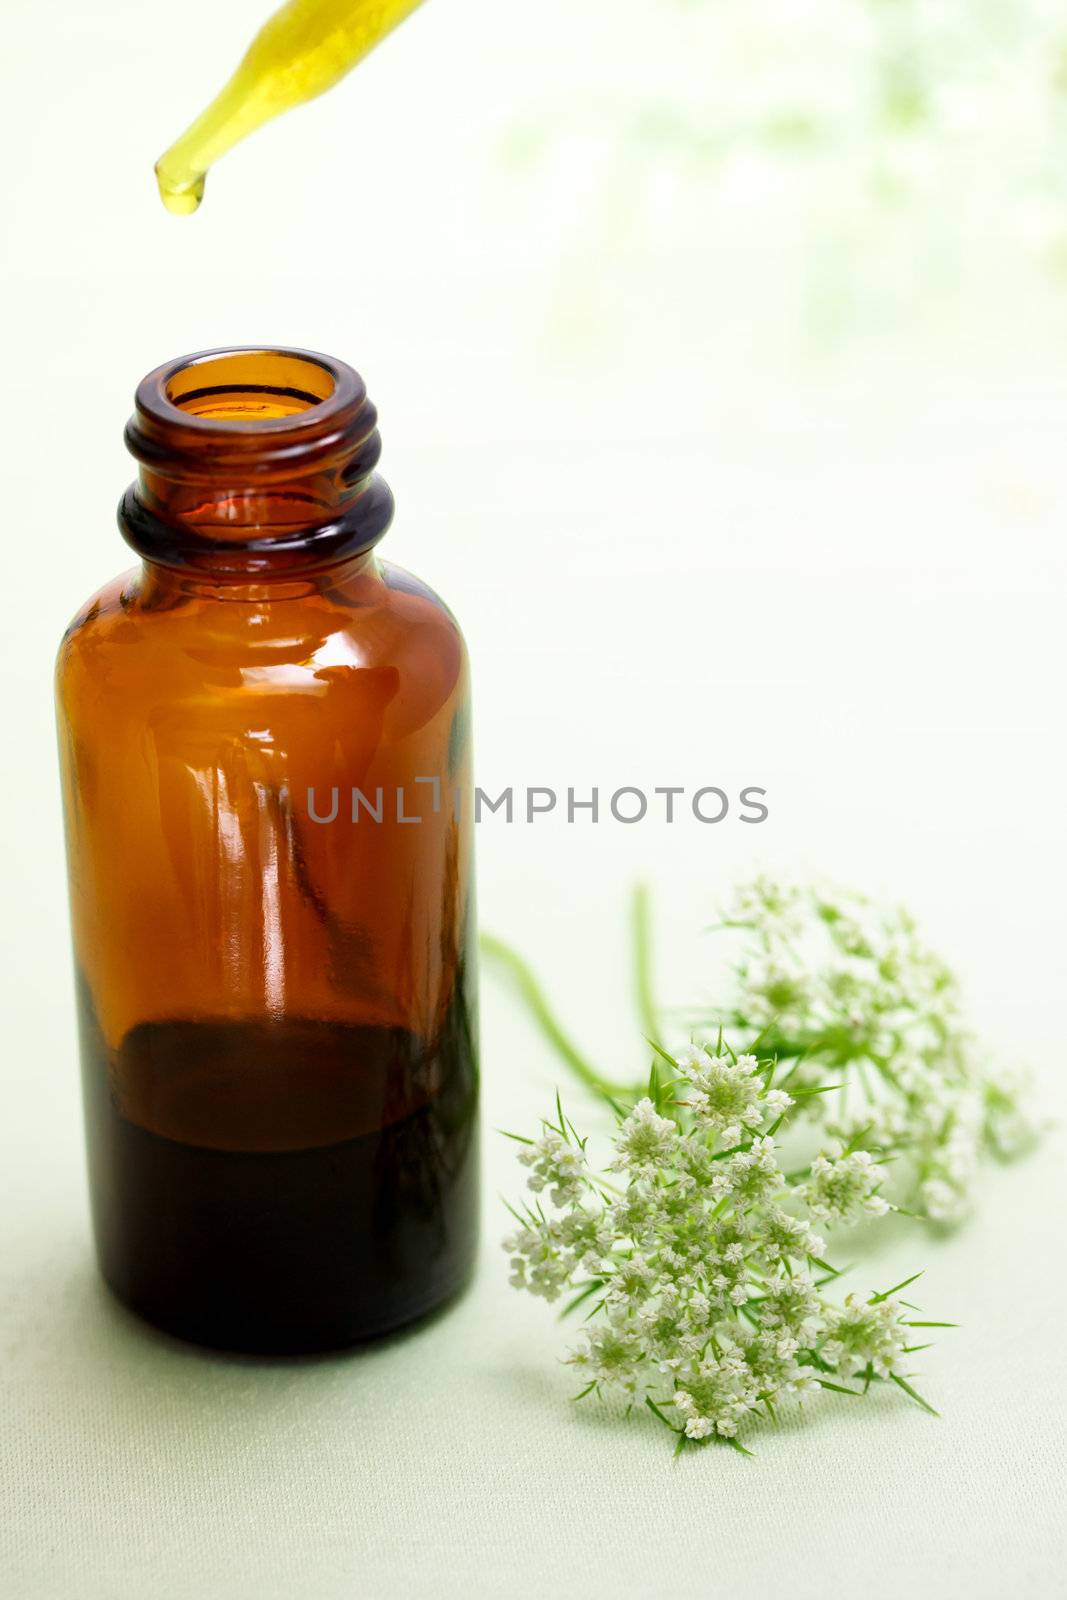 Herbal medicine with dropper bottle and Anise flowers